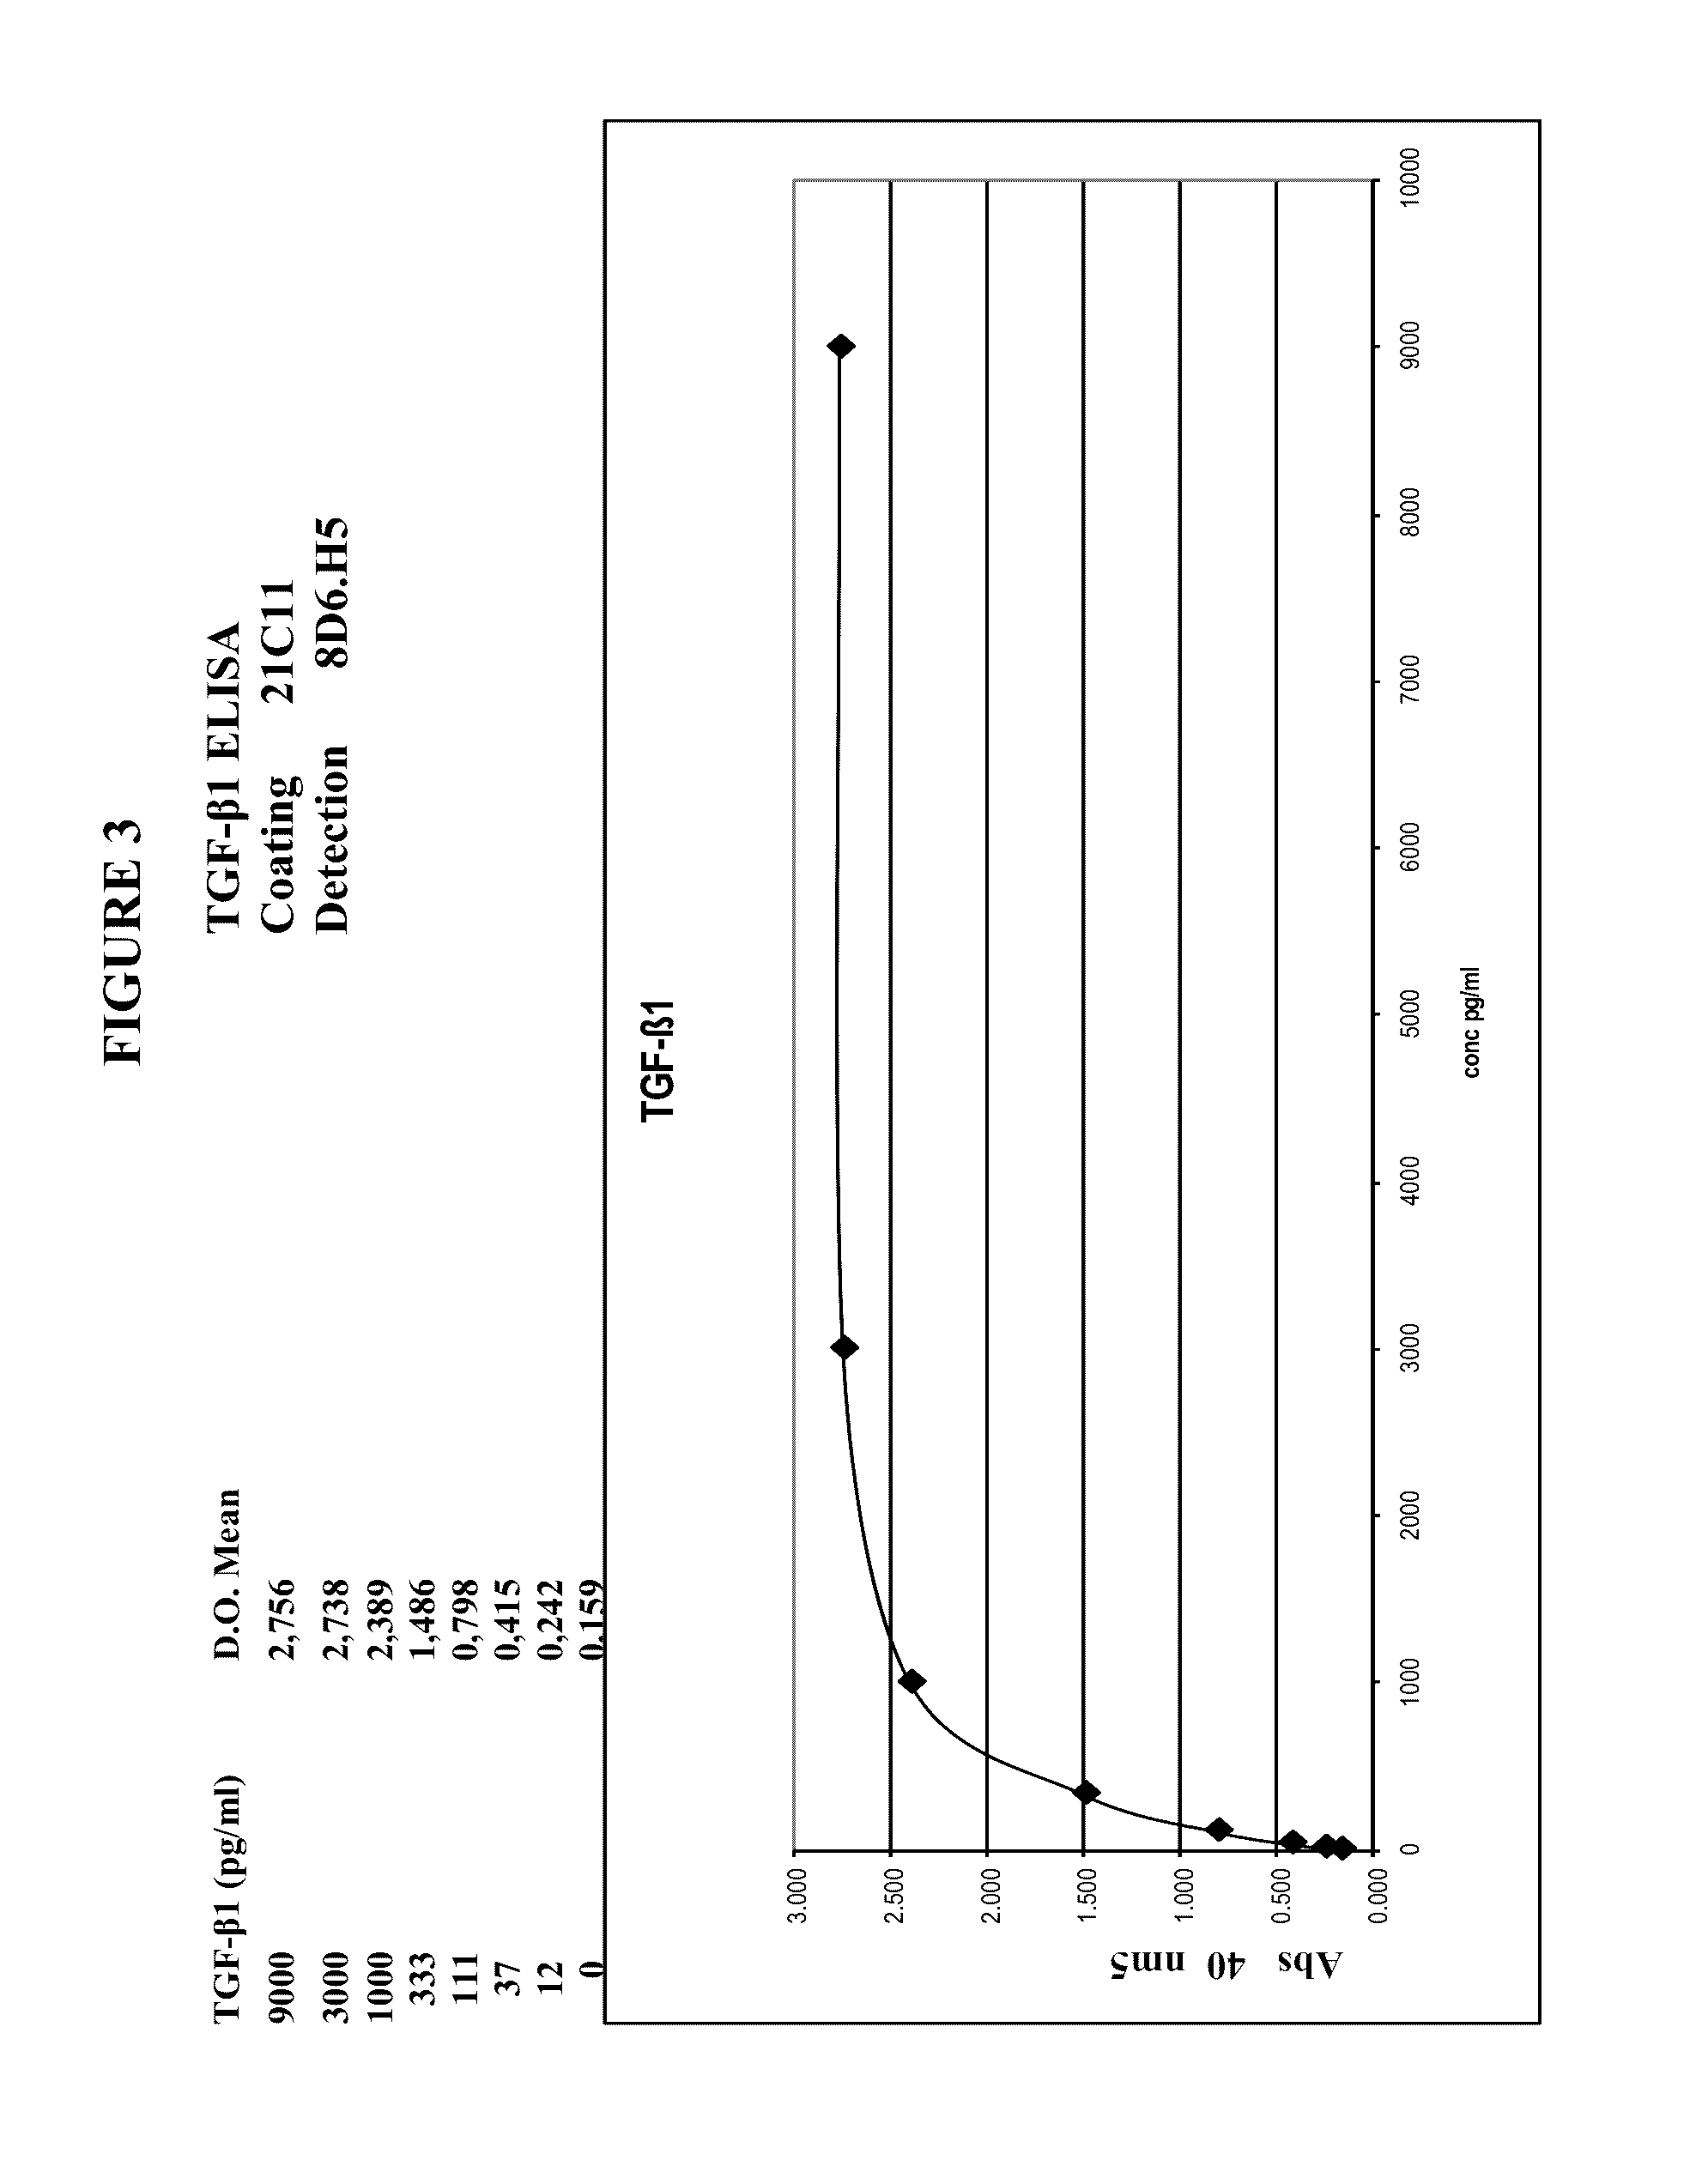 TGF-β1 specific antibodies and methods and uses thereof